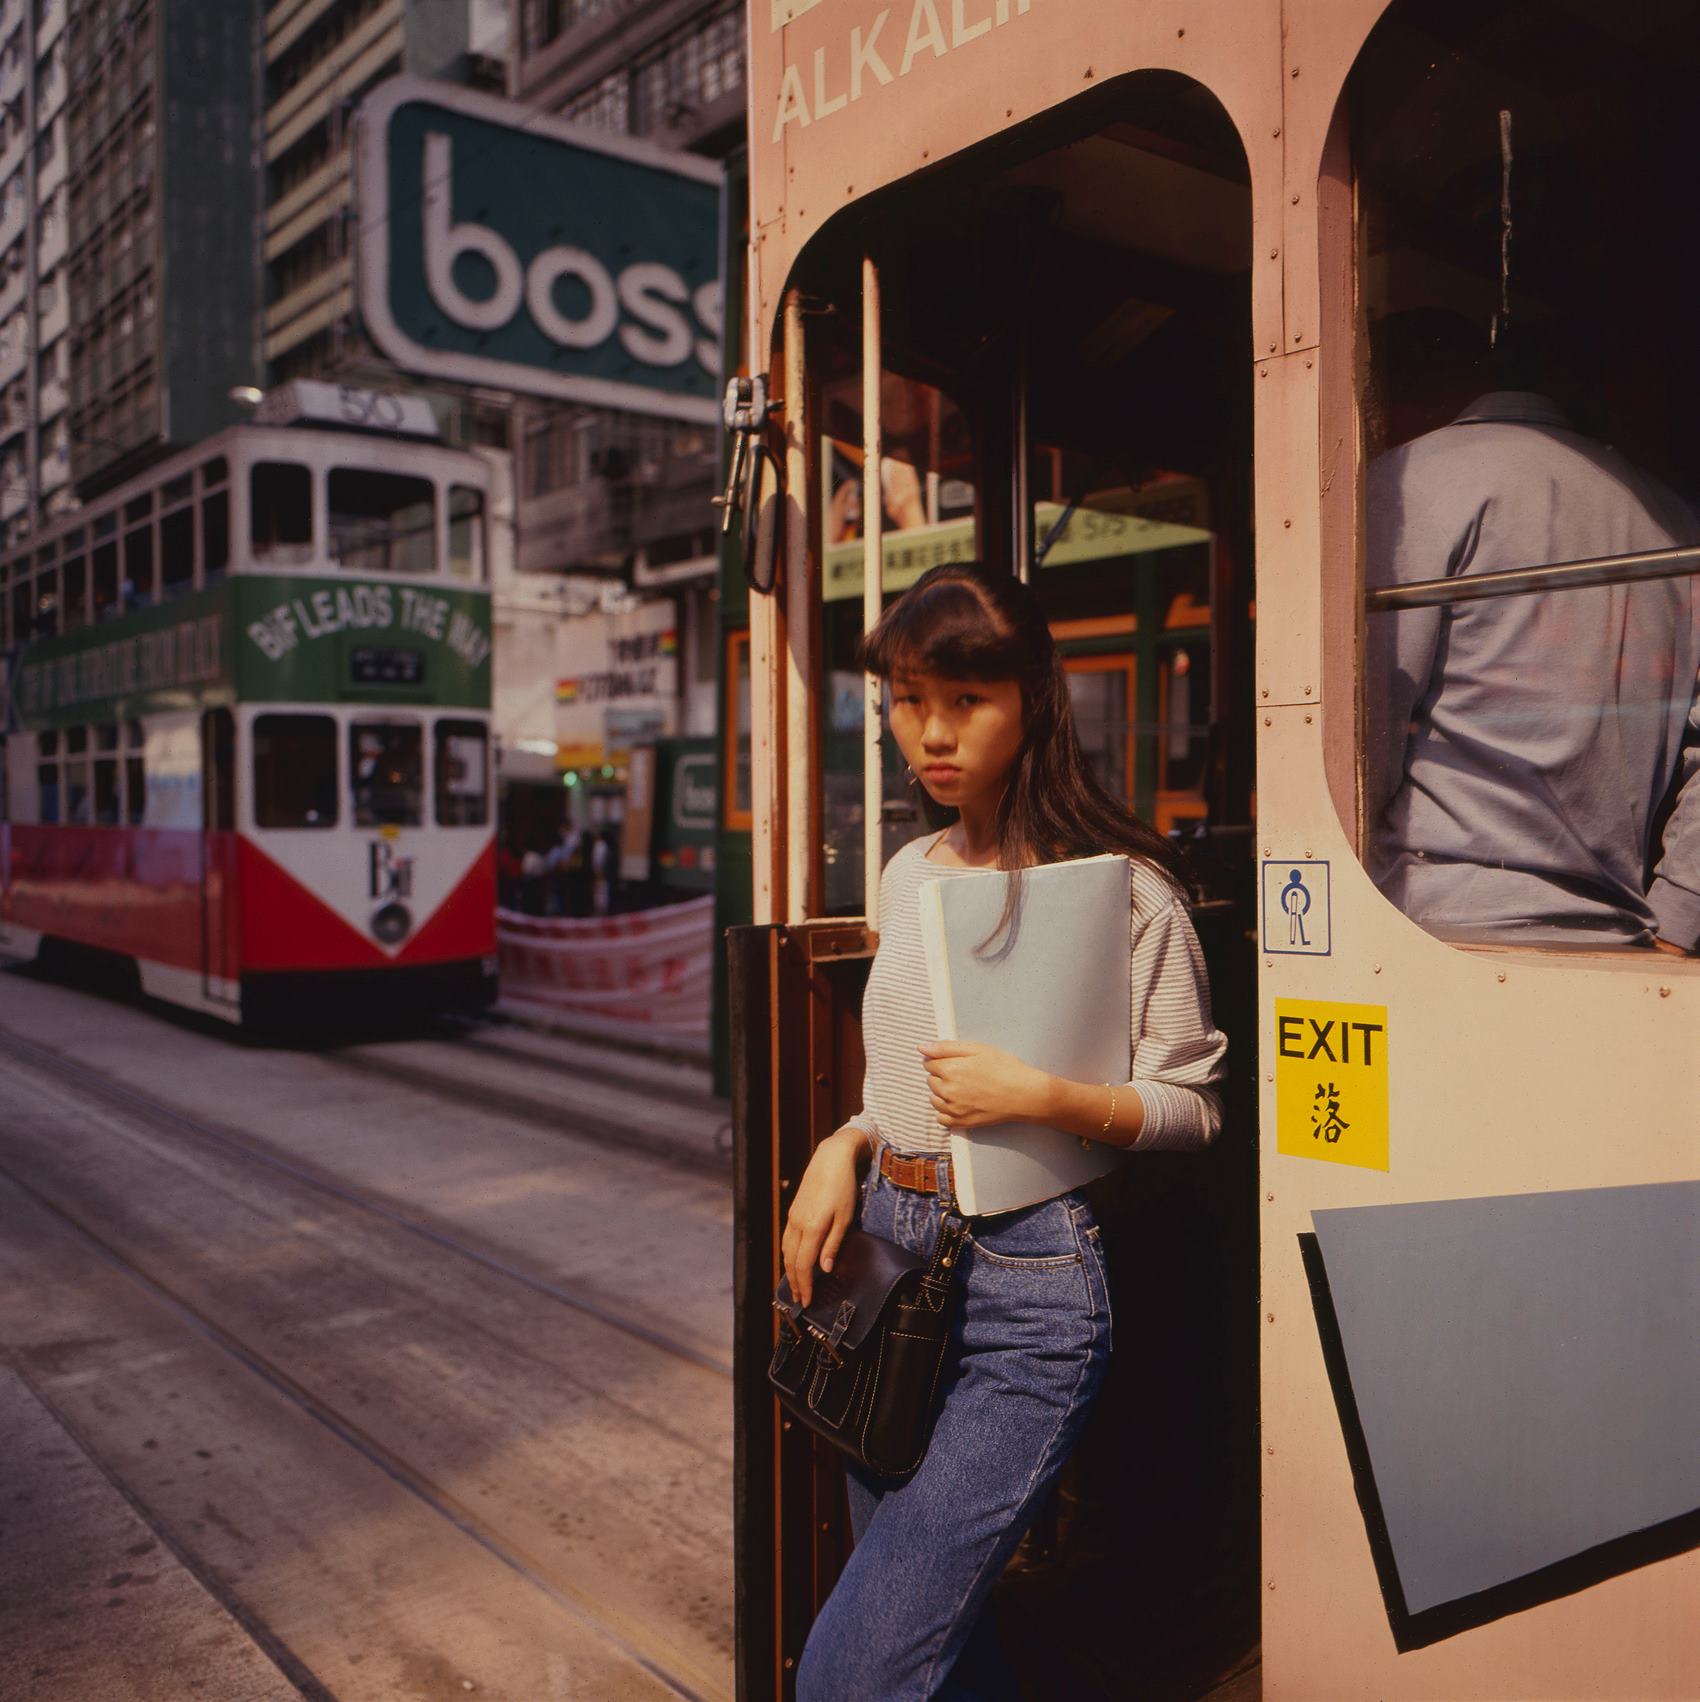 Woman getting off the tram, Central, Hong Kong 1990